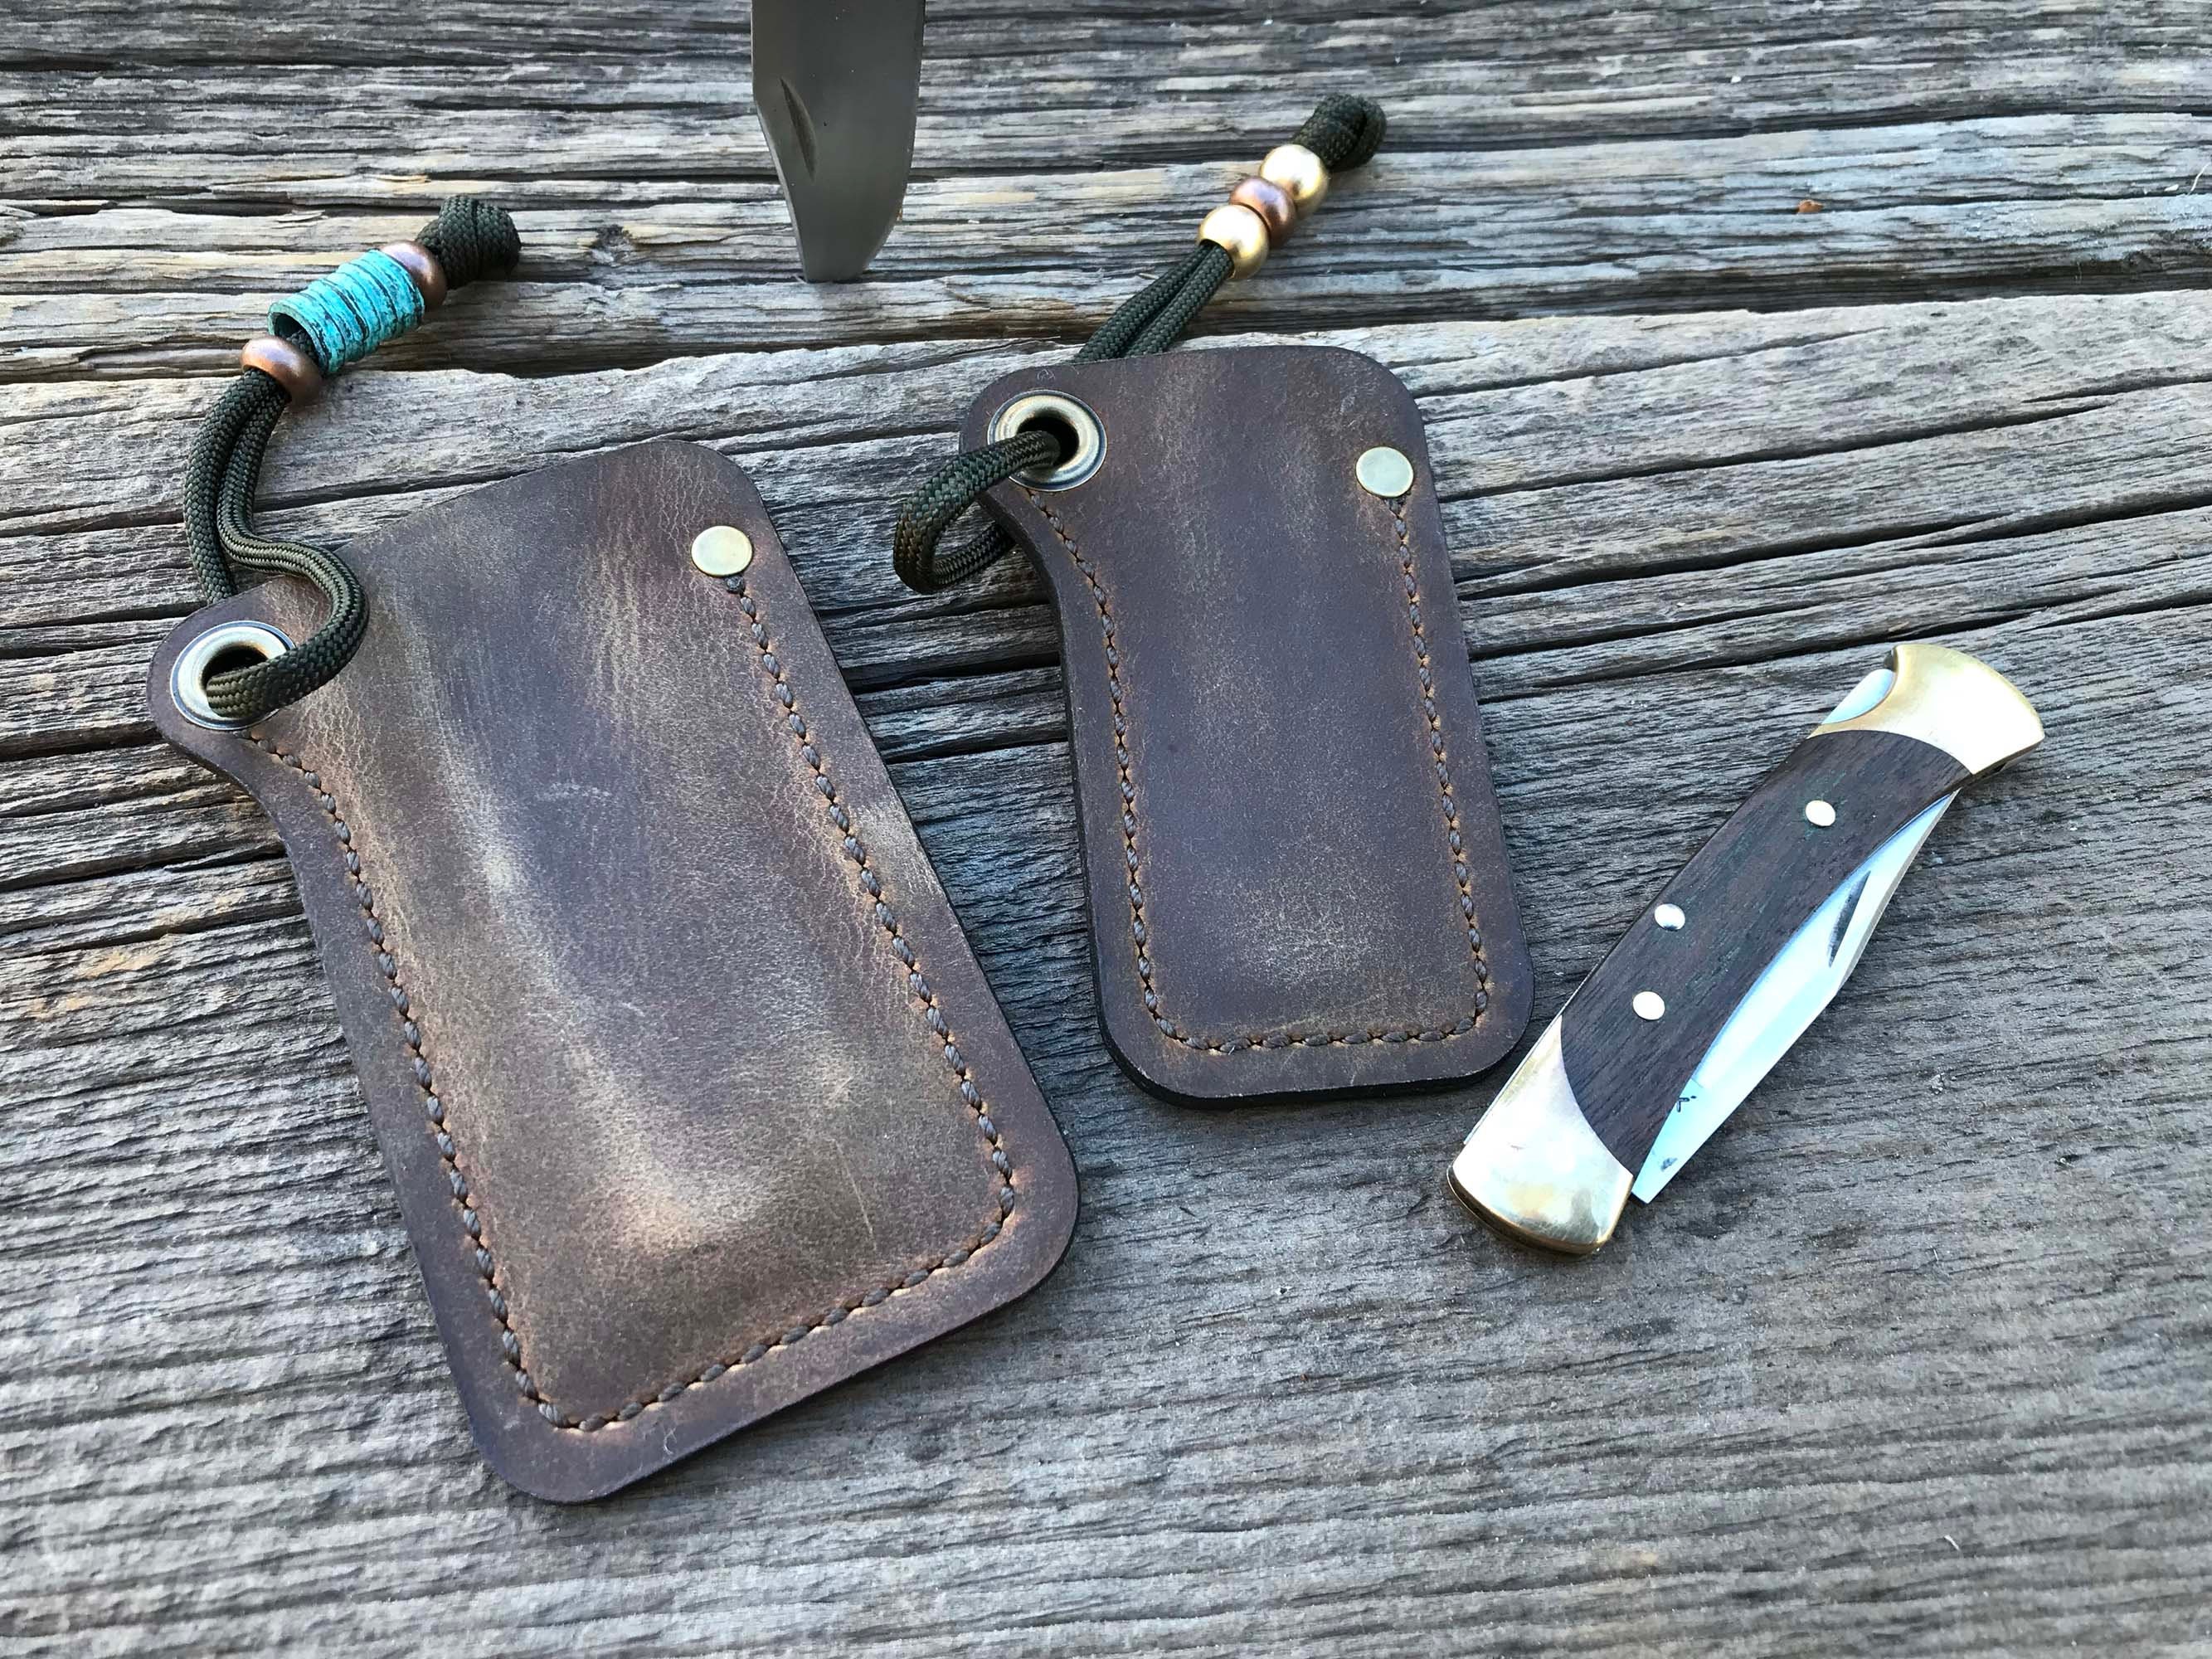 BUILD YOUR OWN Leather Pocket Knife Slip With Belt Clip Pick Your